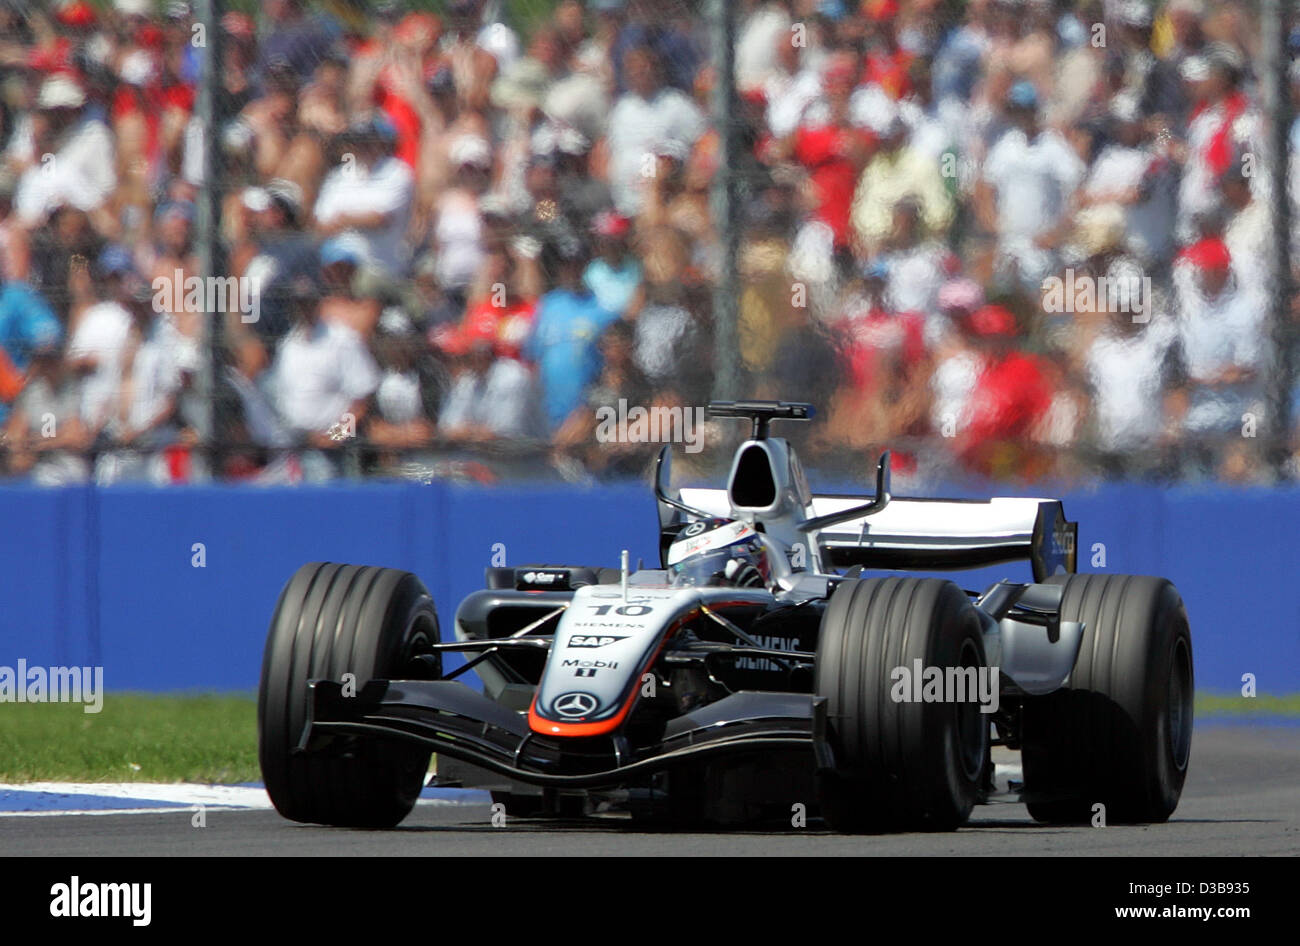 Columbian Formula One driver Juan Pablo Montoya of McLaren Mercedes in action during the British Formula One Grand Prix at the race track in Silverstone, England, Sunday 10 July 2005. Stock Photo